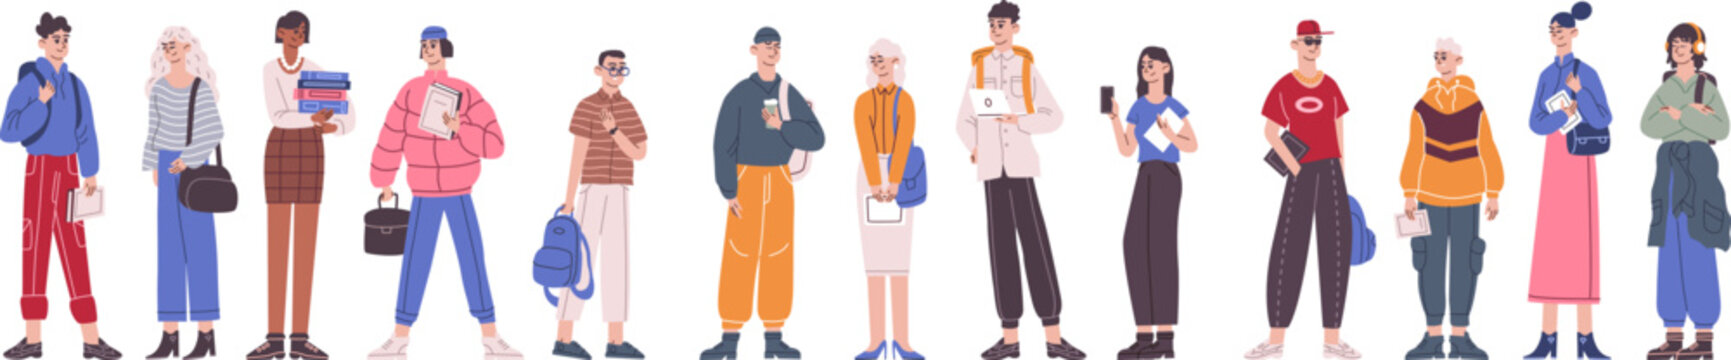 Group college pupils. Diverse students or university classmates, traditional school girl and boy young study people campus teenagers international youth recent vector illustration